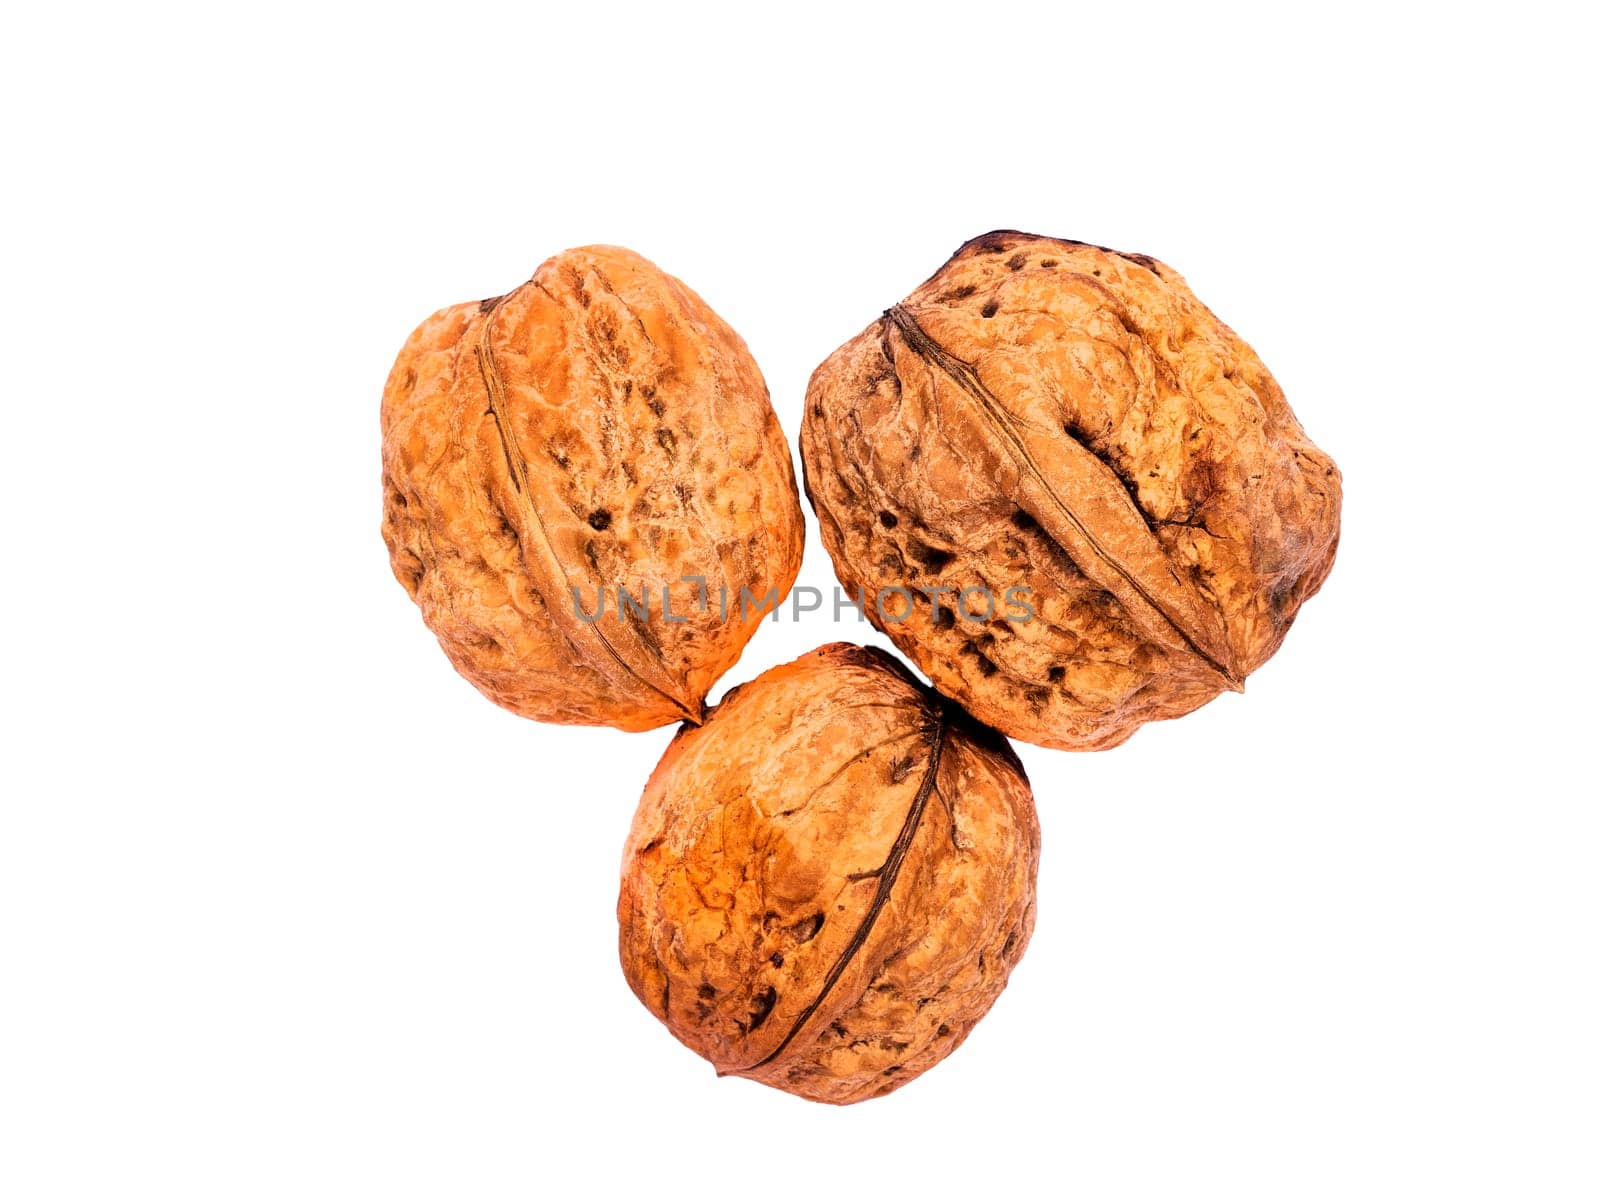 Top view of three walnuts, isolated on a white background by EdVal